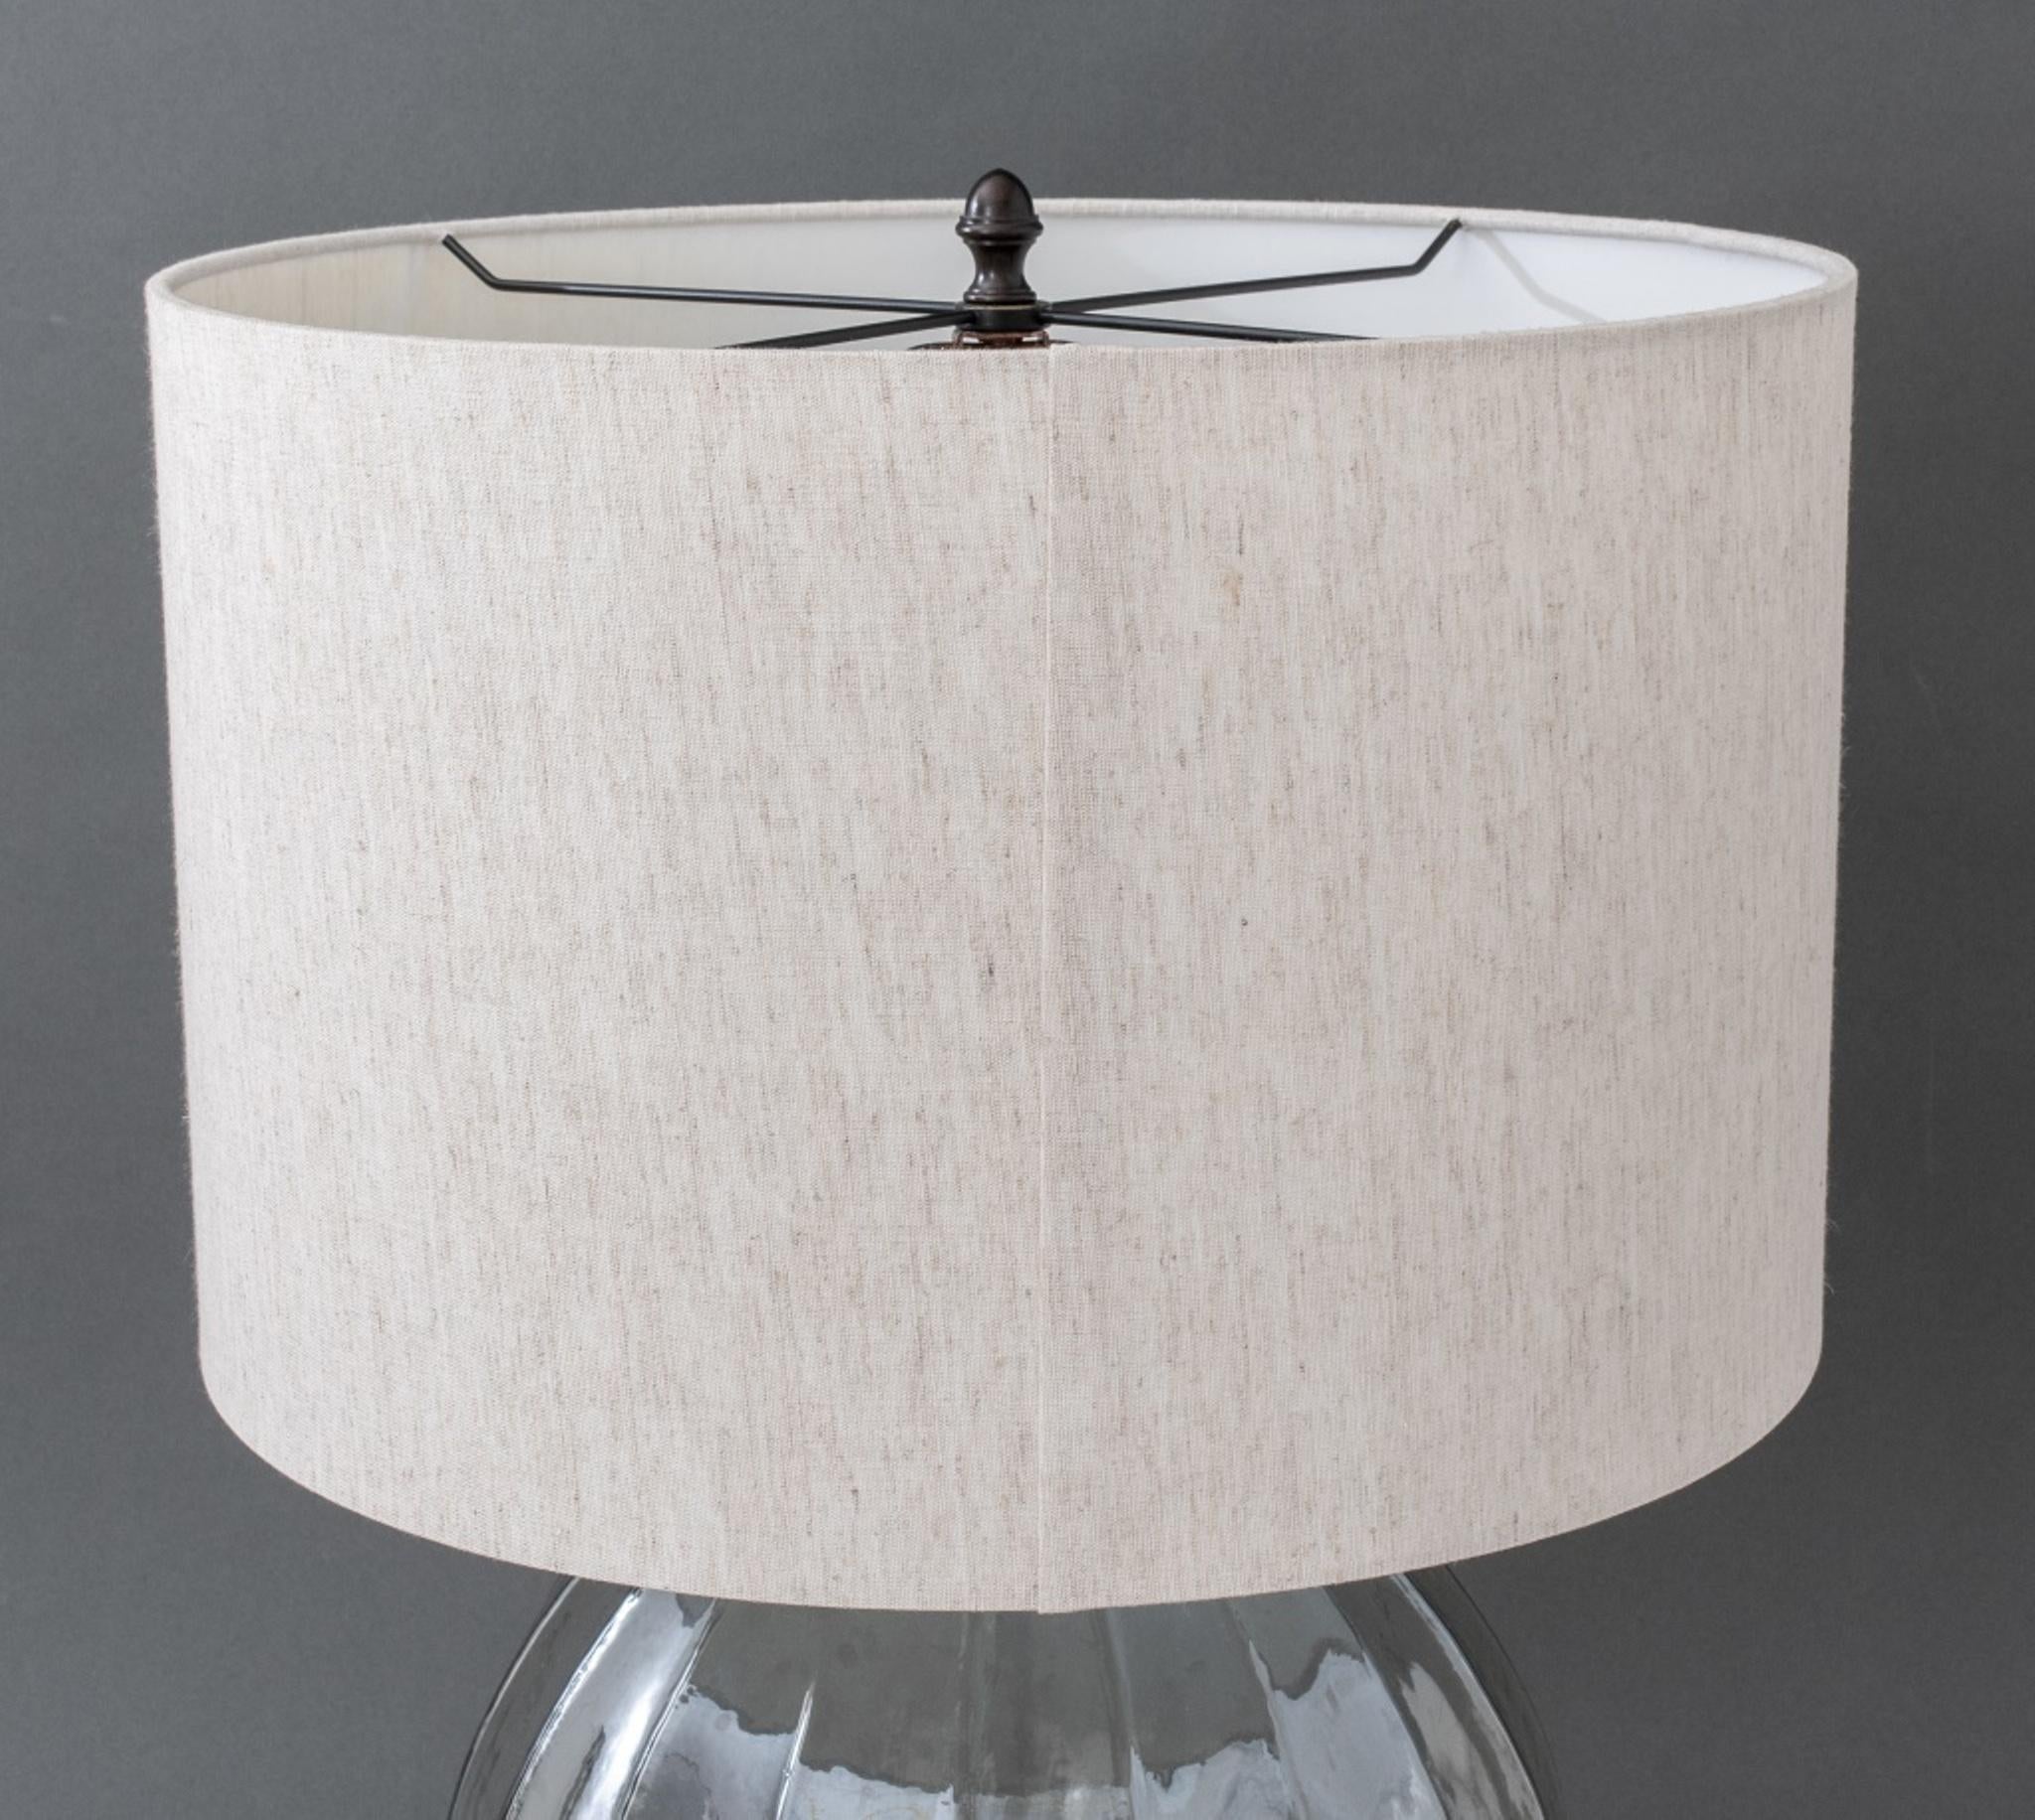 Pair of spherical iridescent glass table lamp with beige shade. Lamp: 25